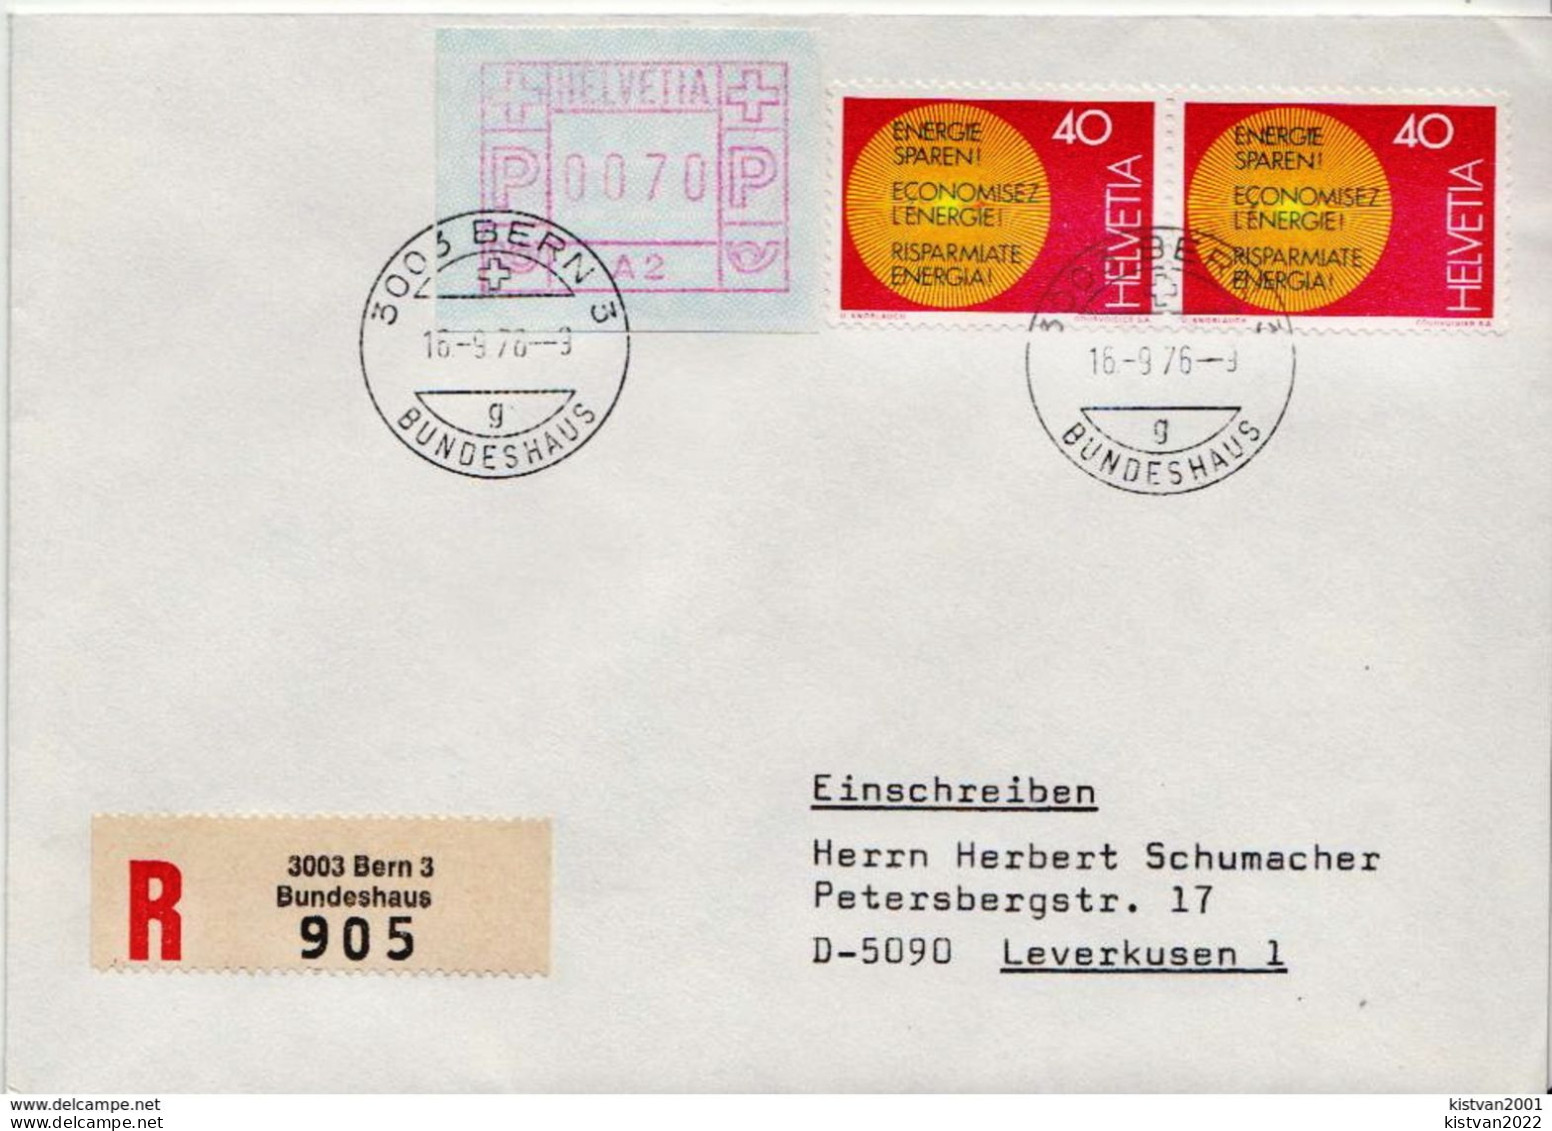 Postal History: Switzerland Registered Cover With Bureau De Poste Automobile Suisse 3 Cancel From 1942 - Automatic Stamps